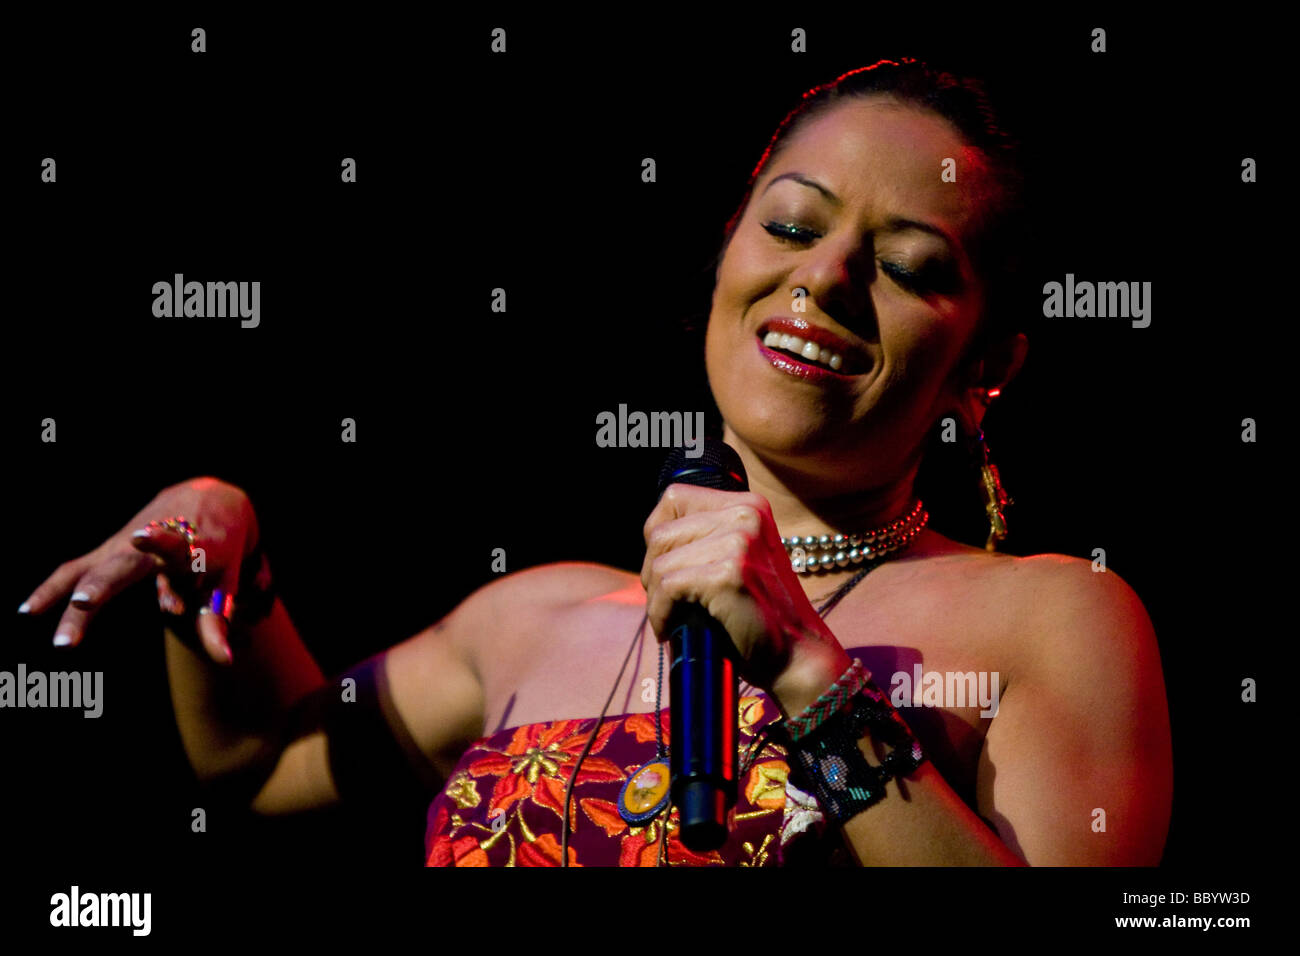 The Mexican singer Lila Downs live in the concert hall of the KKL Lucerne, Switzerland Stock Photo